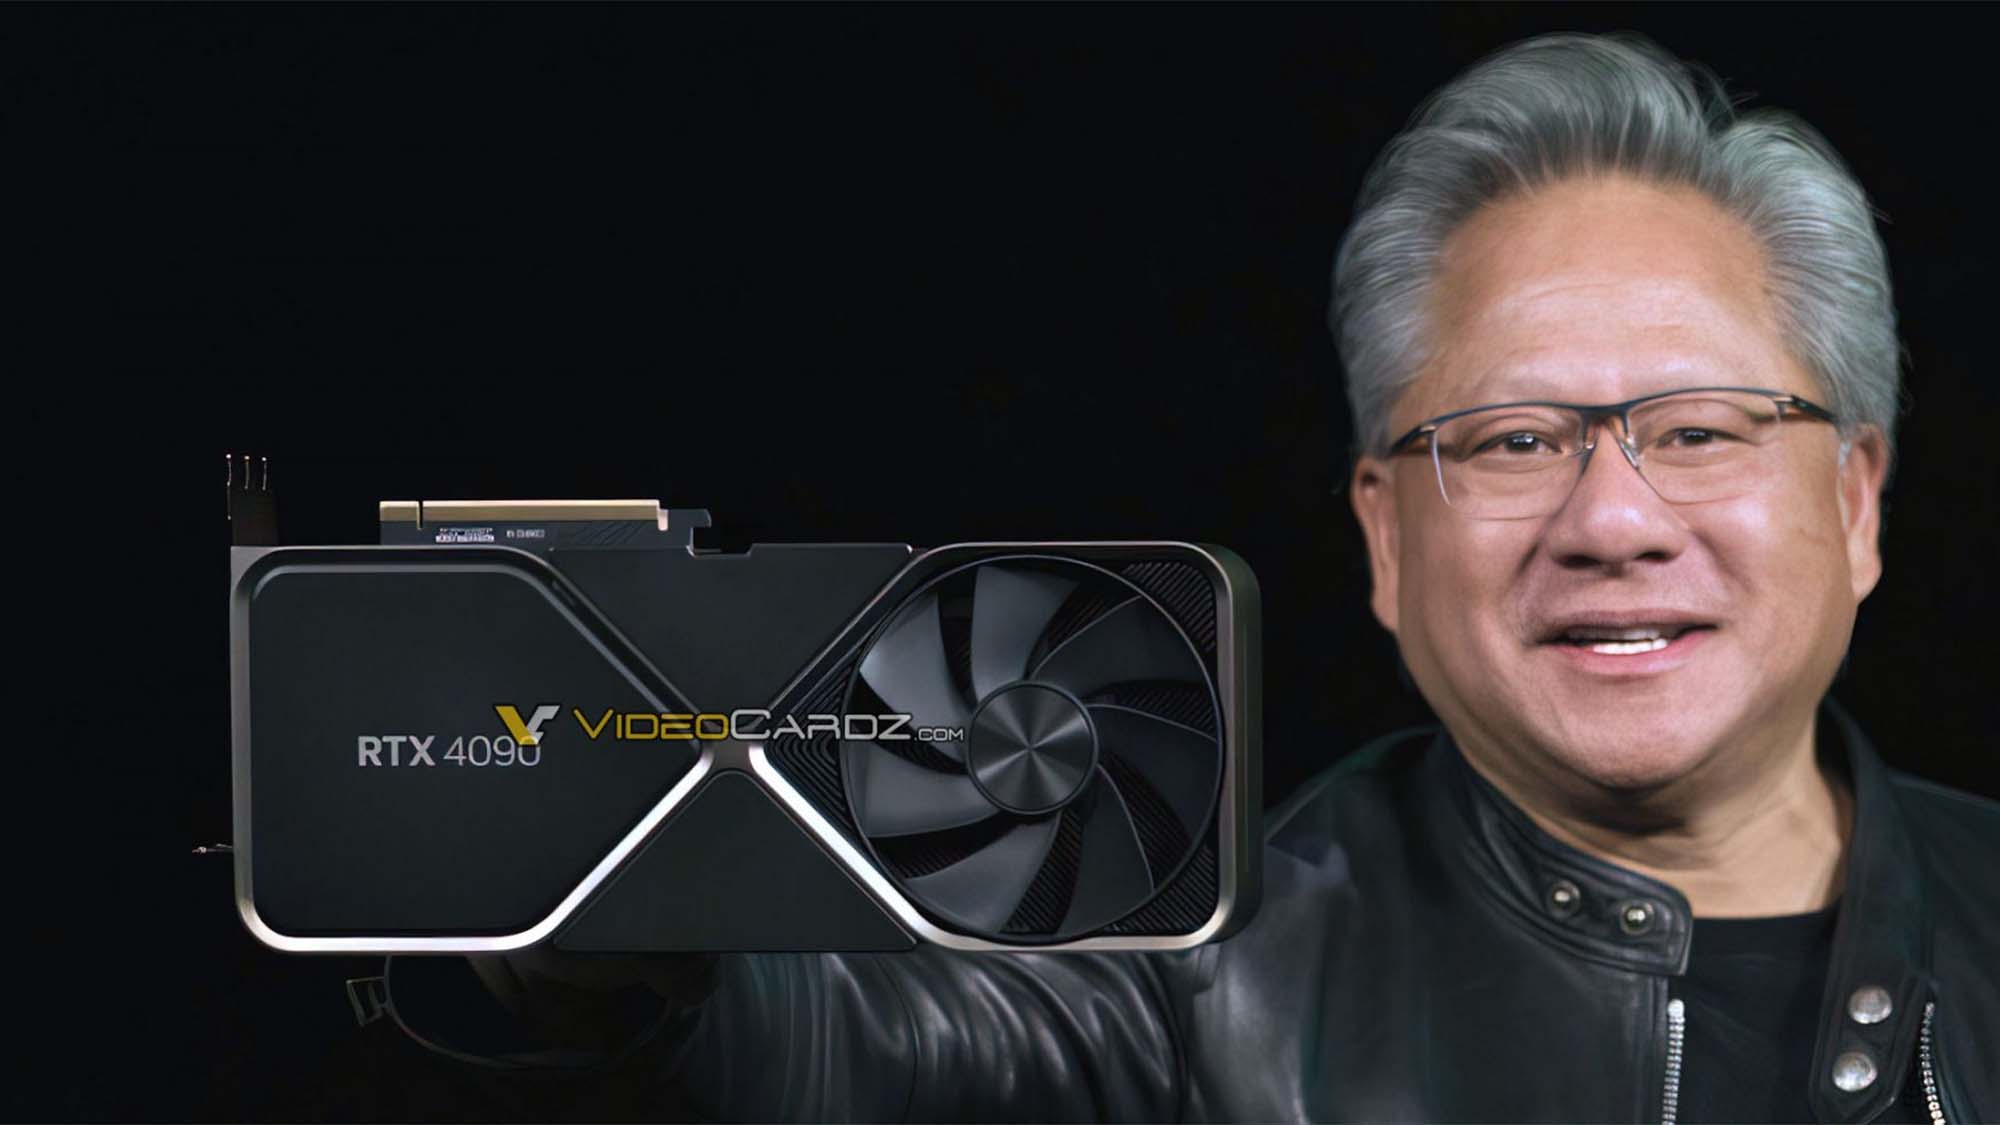 Nvidia RTX 4090 liveblog: what we expect to see at GTC 2022